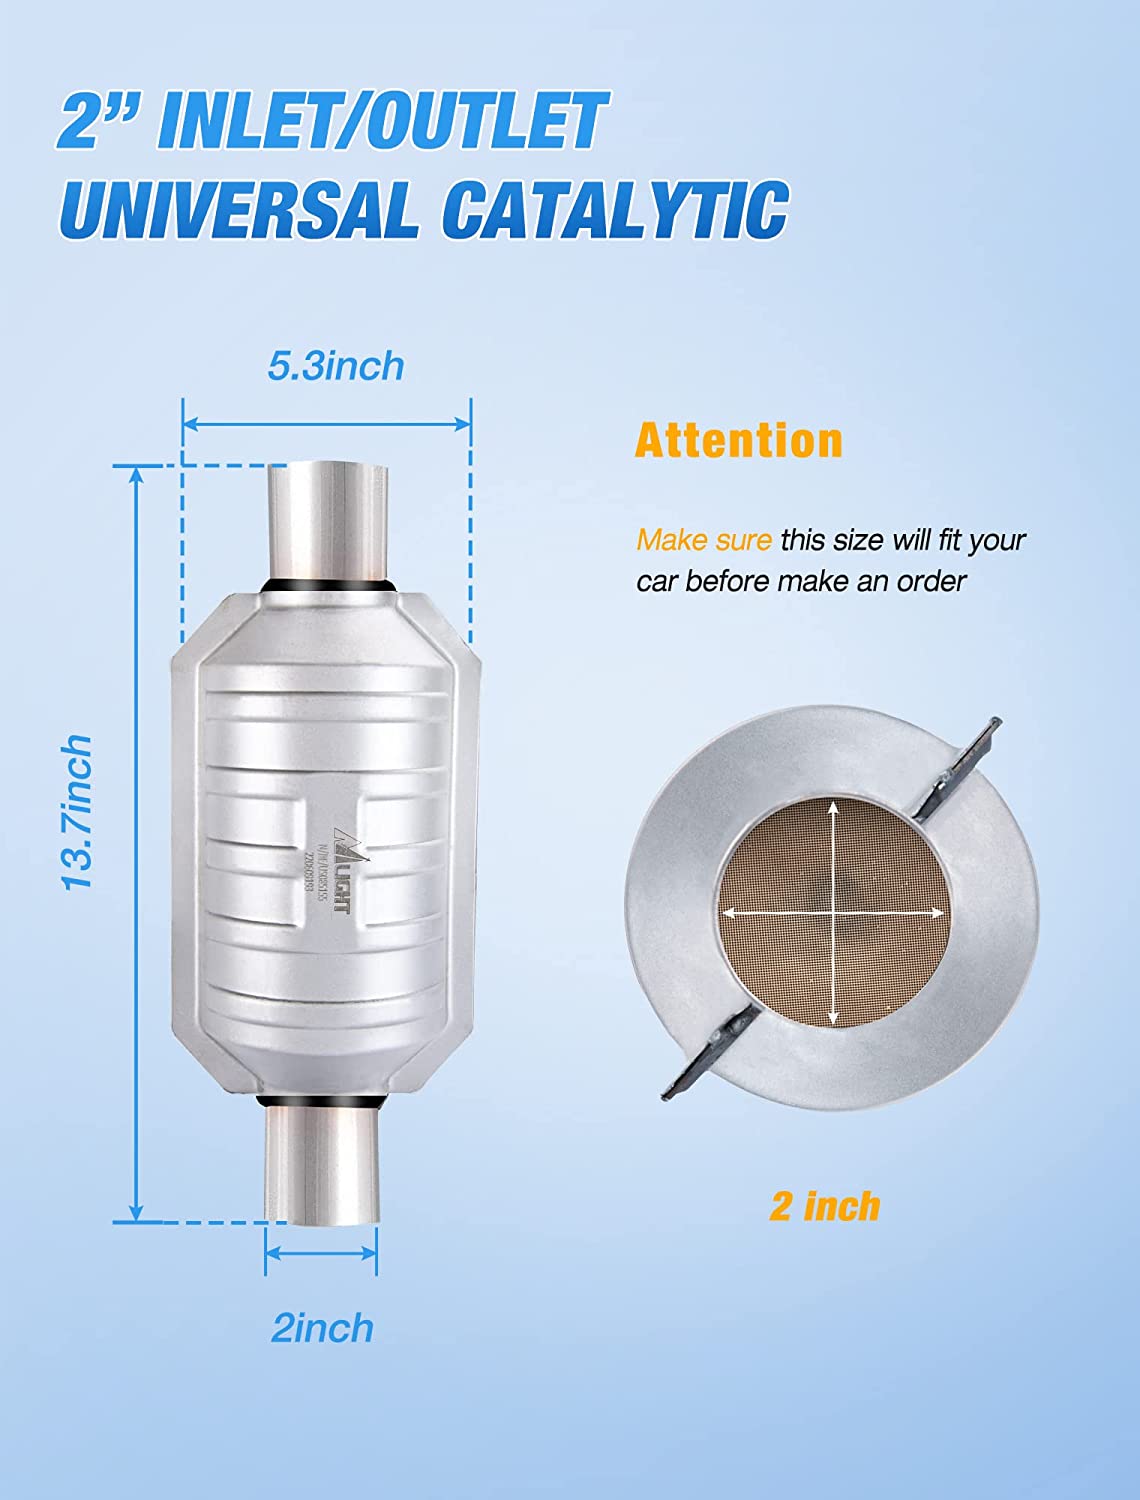 2" Inlet/Outlet Universal Catalytic Converter Nilight